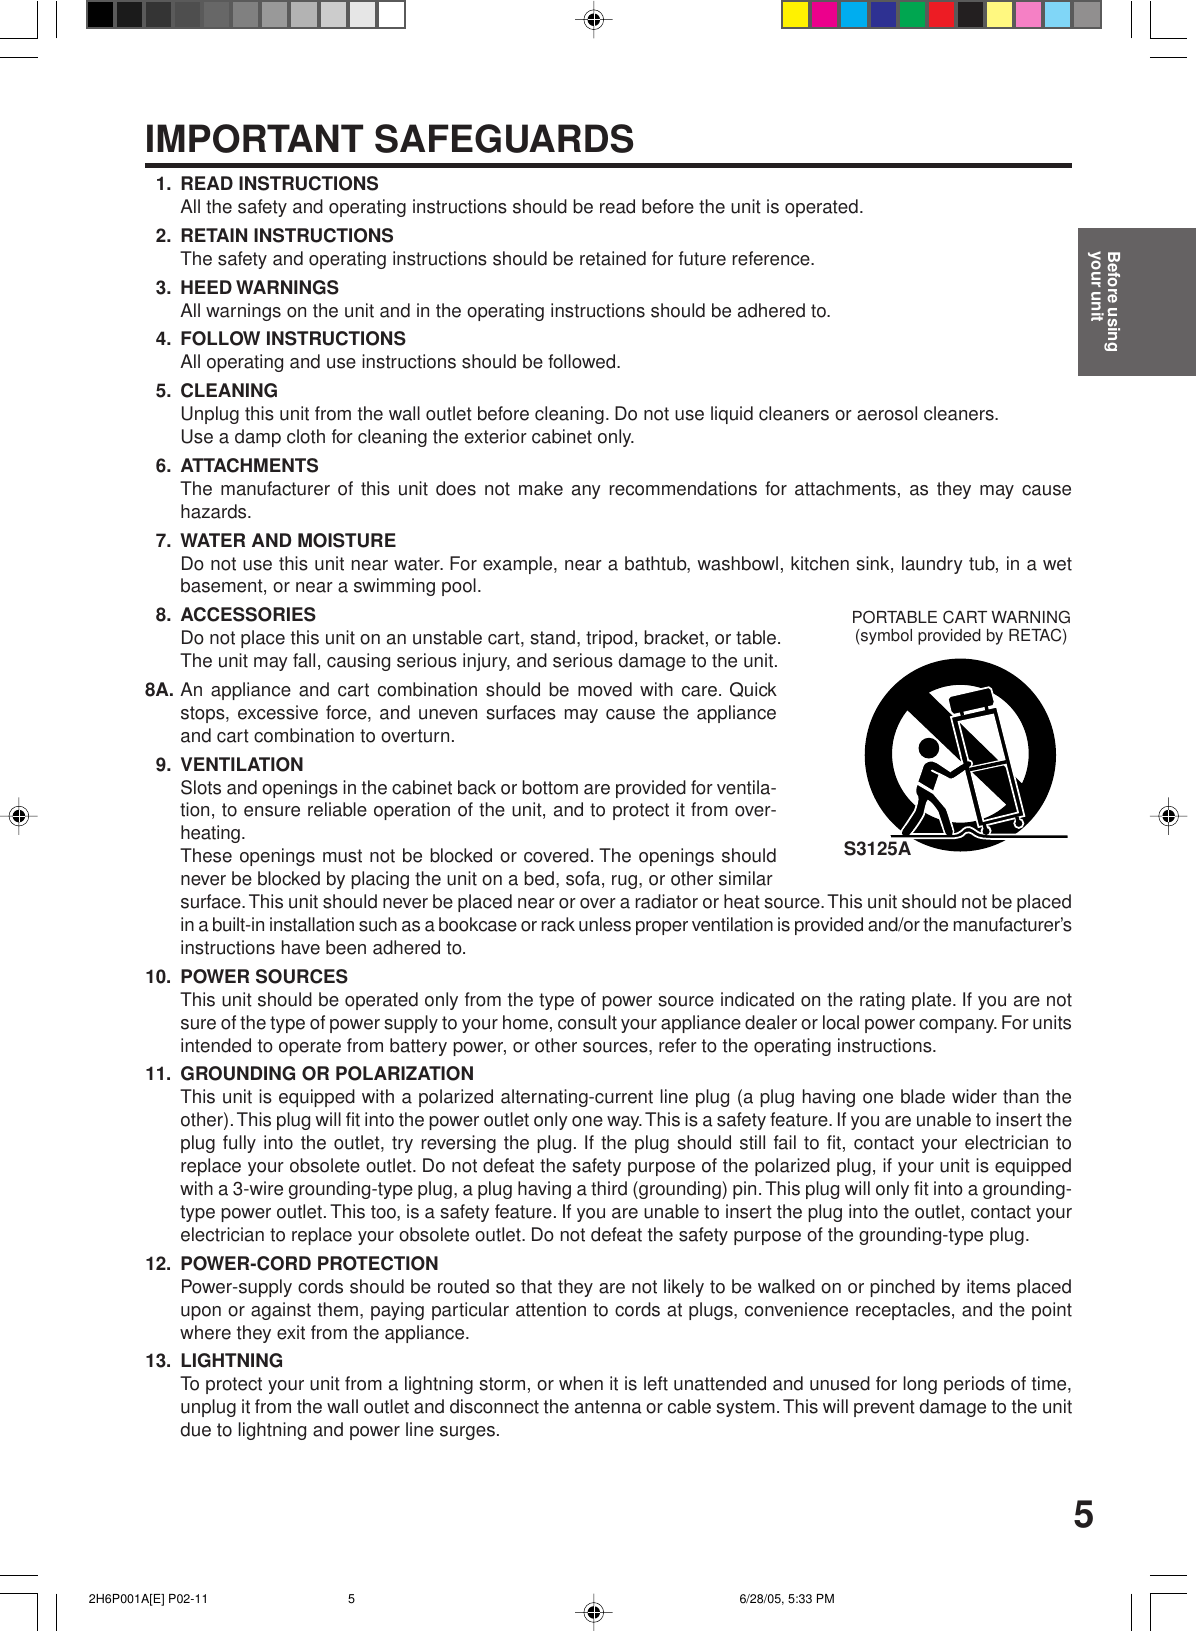 51. READ INSTRUCTIONSAll the safety and operating instructions should be read before the unit is operated.2. RETAIN INSTRUCTIONSThe safety and operating instructions should be retained for future reference.3. HEED WARNINGSAll warnings on the unit and in the operating instructions should be adhered to.4. FOLLOW INSTRUCTIONSAll operating and use instructions should be followed.5. CLEANINGUnplug this unit from the wall outlet before cleaning. Do not use liquid cleaners or aerosol cleaners.Use a damp cloth for cleaning the exterior cabinet only.6. ATTACHMENTSThe manufacturer of this unit does not make any recommendations for attachments, as they may causehazards.7. WATER AND MOISTUREDo not use this unit near water. For example, near a bathtub, washbowl, kitchen sink, laundry tub, in a wetbasement, or near a swimming pool.8. ACCESSORIESDo not place this unit on an unstable cart, stand, tripod, bracket, or table.The unit may fall, causing serious injury, and serious damage to the unit.8A. An appliance and cart combination should be moved with care. Quickstops, excessive force, and uneven surfaces may cause the applianceand cart combination to overturn.9. VENTILATIONSlots and openings in the cabinet back or bottom are provided for ventila-tion, to ensure reliable operation of the unit, and to protect it from over-heating.These openings must not be blocked or covered. The openings shouldnever be blocked by placing the unit on a bed, sofa, rug, or other similarsurface. This unit should never be placed near or over a radiator or heat source. This unit should not be placedin a built-in installation such as a bookcase or rack unless proper ventilation is provided and/or the manufacturer’sinstructions have been adhered to.10. POWER SOURCESThis unit should be operated only from the type of power source indicated on the rating plate. If you are notsure of the type of power supply to your home, consult your appliance dealer or local power company. For unitsintended to operate from battery power, or other sources, refer to the operating instructions.11. GROUNDING OR POLARIZATIONThis unit is equipped with a polarized alternating-current line plug (a plug having one blade wider than theother). This plug will fit into the power outlet only one way. This is a safety feature. If you are unable to insert theplug fully into the outlet, try reversing the plug. If the plug should still fail to fit, contact your electrician toreplace your obsolete outlet. Do not defeat the safety purpose of the polarized plug, if your unit is equippedwith a 3-wire grounding-type plug, a plug having a third (grounding) pin. This plug will only fit into a grounding-type power outlet. This too, is a safety feature. If you are unable to insert the plug into the outlet, contact yourelectrician to replace your obsolete outlet. Do not defeat the safety purpose of the grounding-type plug.12. POWER-CORD PROTECTIONPower-supply cords should be routed so that they are not likely to be walked on or pinched by items placedupon or against them, paying particular attention to cords at plugs, convenience receptacles, and the pointwhere they exit from the appliance.13. LIGHTNINGTo protect your unit from a lightning storm, or when it is left unattended and unused for long periods of time,unplug it from the wall outlet and disconnect the antenna or cable system. This will prevent damage to the unitdue to lightning and power line surges.S3125APORTABLE CART WARNING(symbol provided by RETAC)IMPORTANT SAFEGUARDSBefore usingyour unit 2H6P001A[E] P02-11 6/28/05, 5:33 PM5